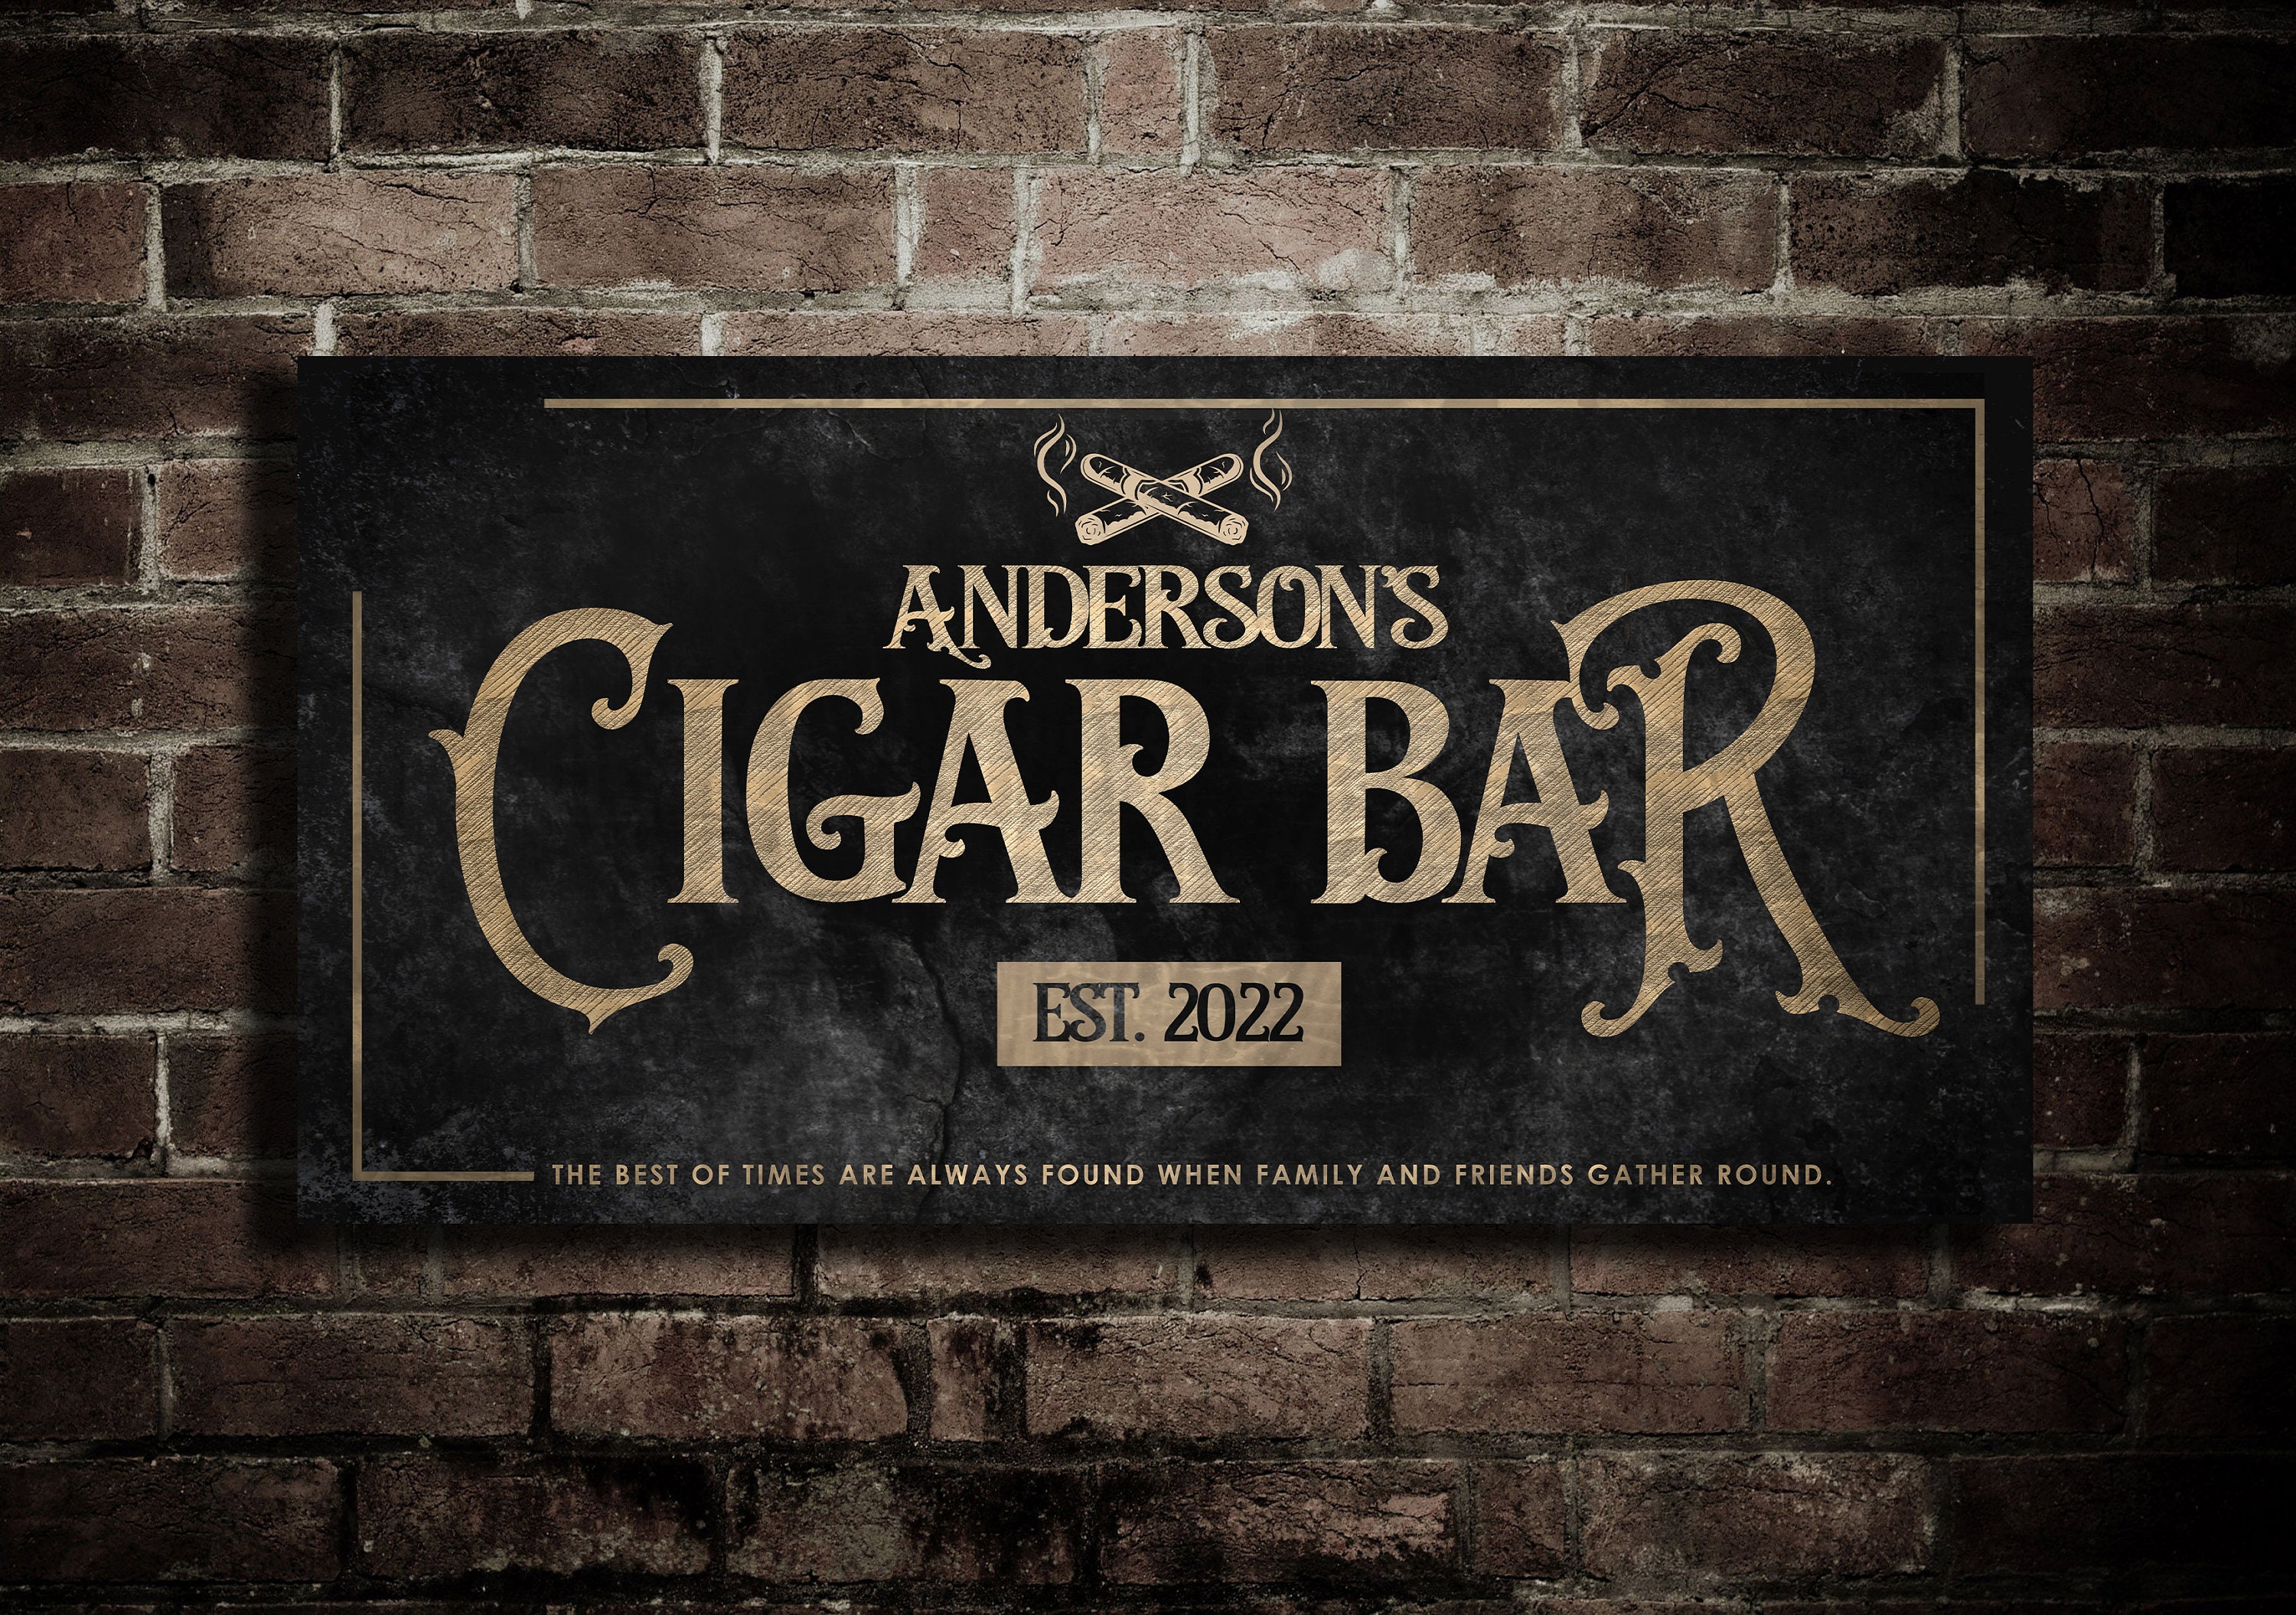 Cigar Bar & Lounge Sign for a Speakeasy Decor or Smoking Room Poster P –  Walls of Wisdom